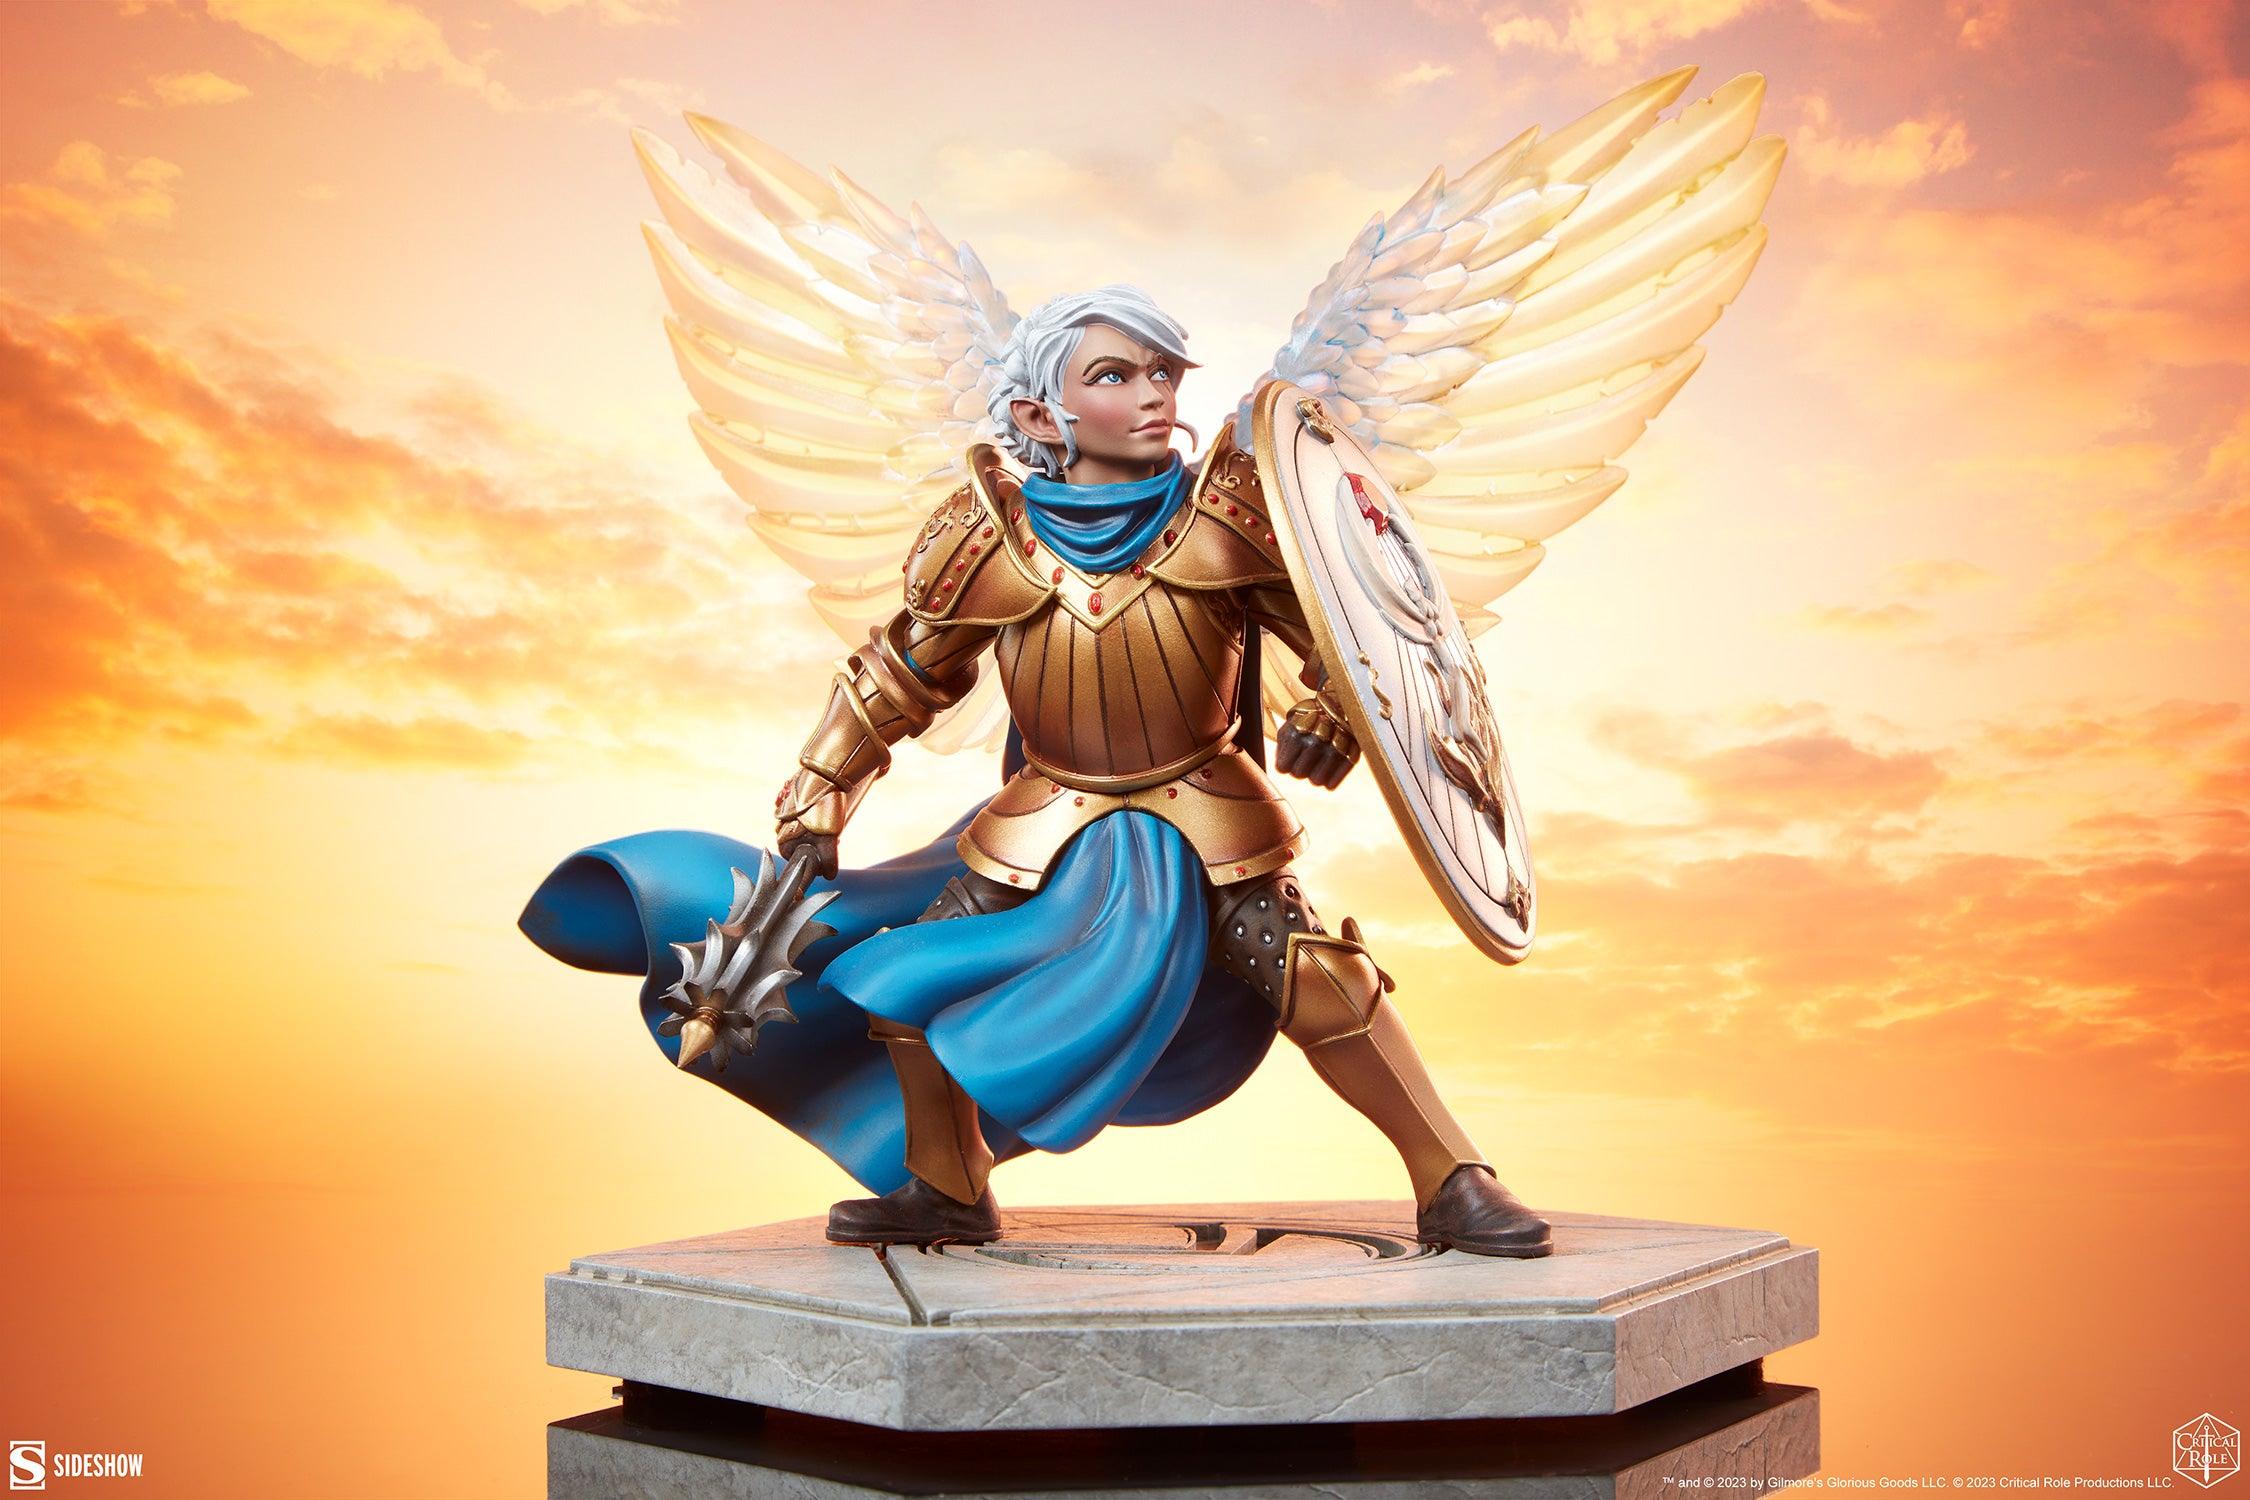 SID200621 Critical Role - Pike Trickfoot (Vox Machina) Statue - Sideshow Collectibles - Titan Pop Culture